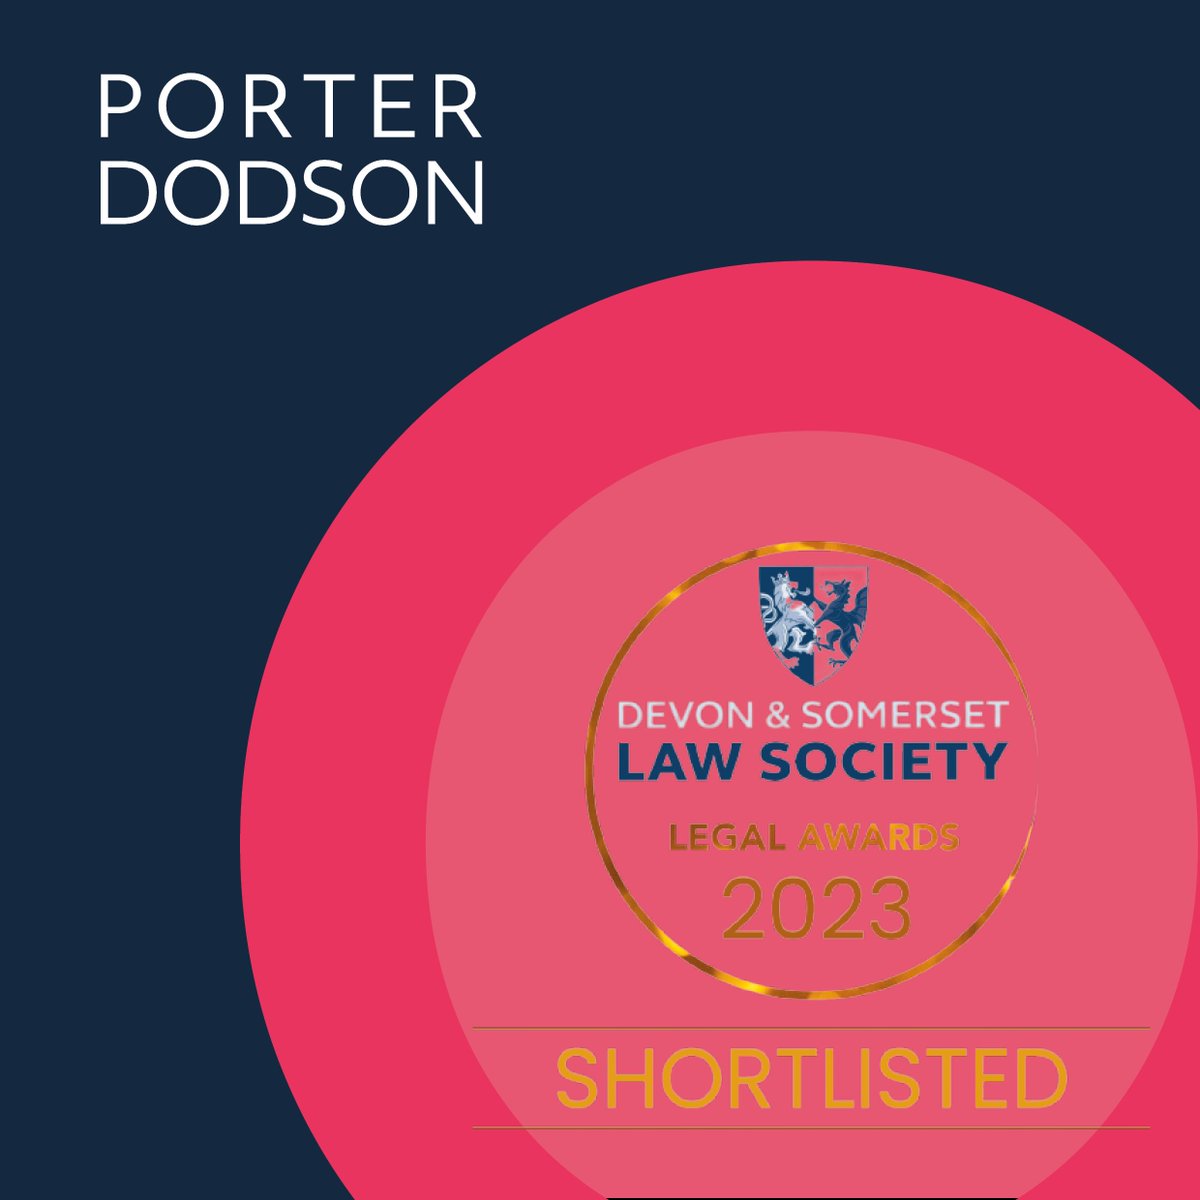 We are delighted to have been shortlisted in 3 categories of the #DASLS Legal Awards. 2023 We have also submitted an entry to the Lifetime Achievement category, which we will find out about on the night. Looking forward to the final results and the awards dinner in June!